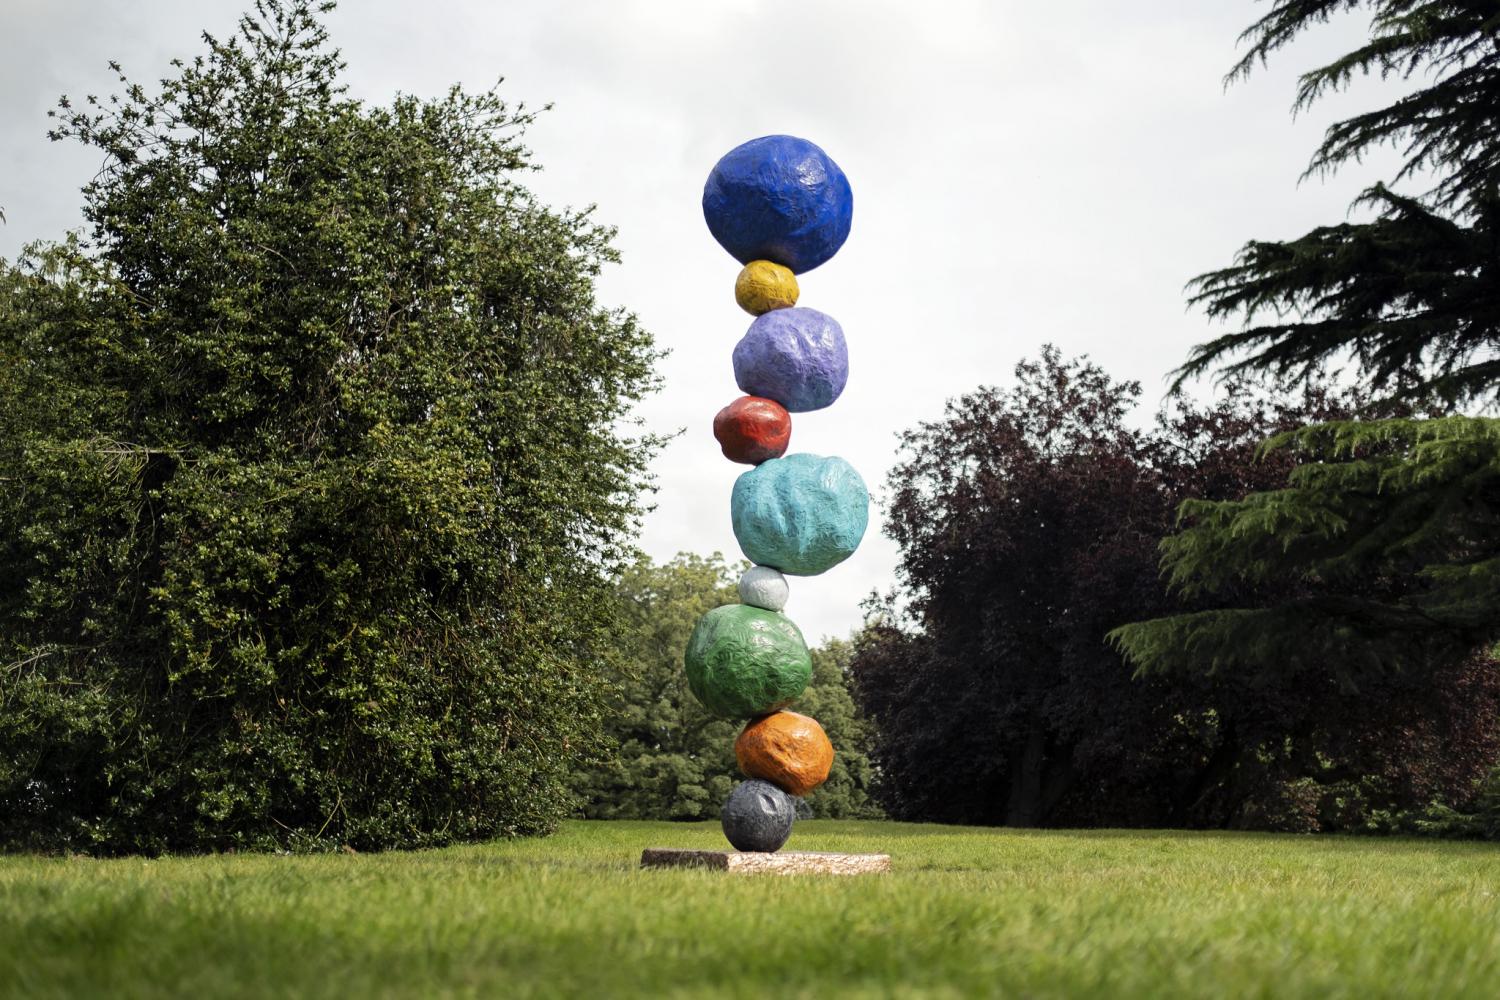 Annie Morris, Stack 9, Ultramarine Blue, 2021, presented by Timothy Taylor, Frieze Sculpture 2021